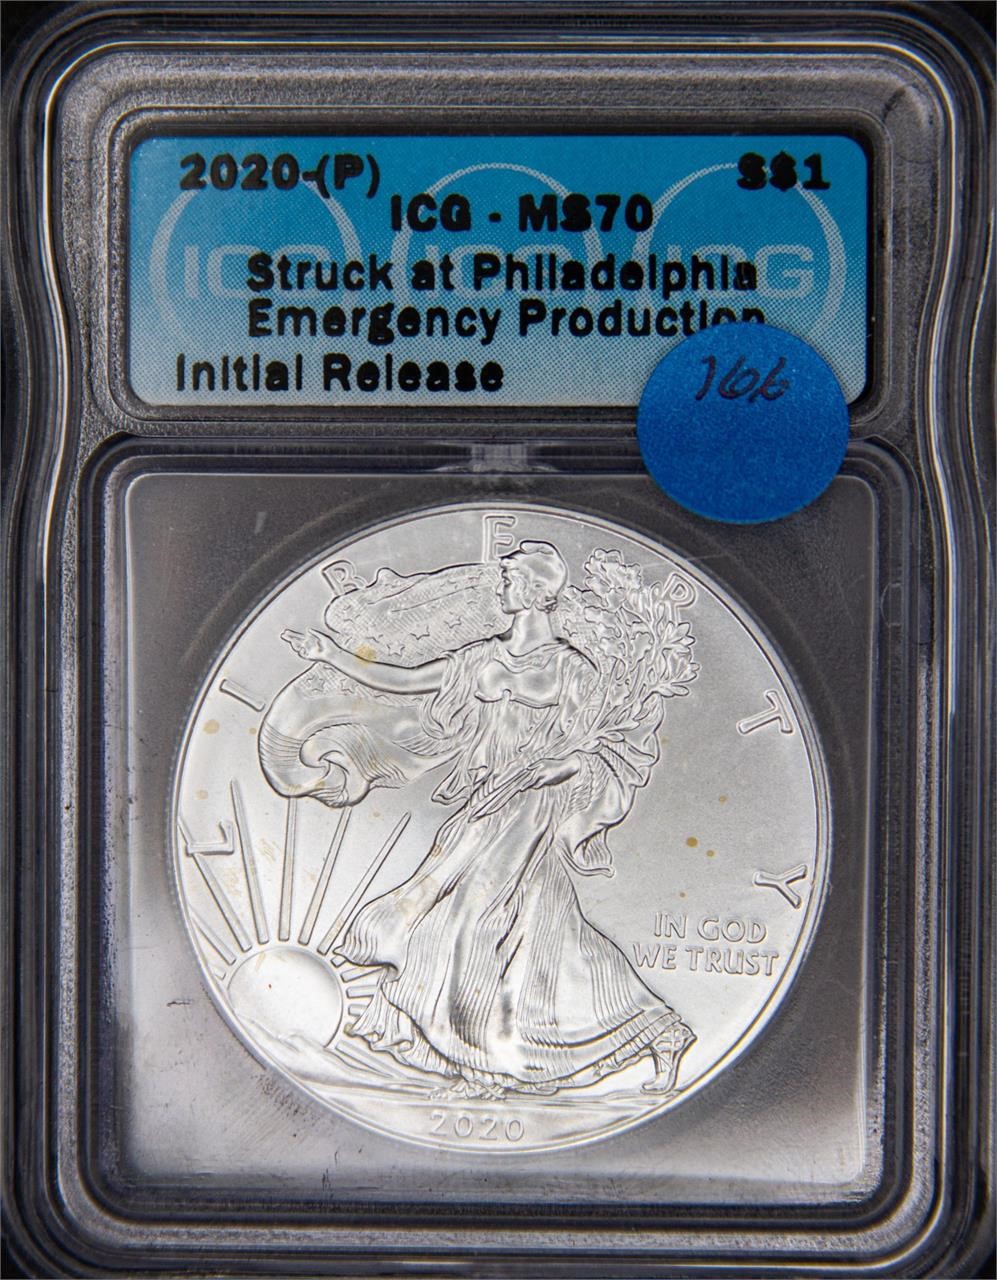 2020 PICG M570 Emergency Production Silver Eagle